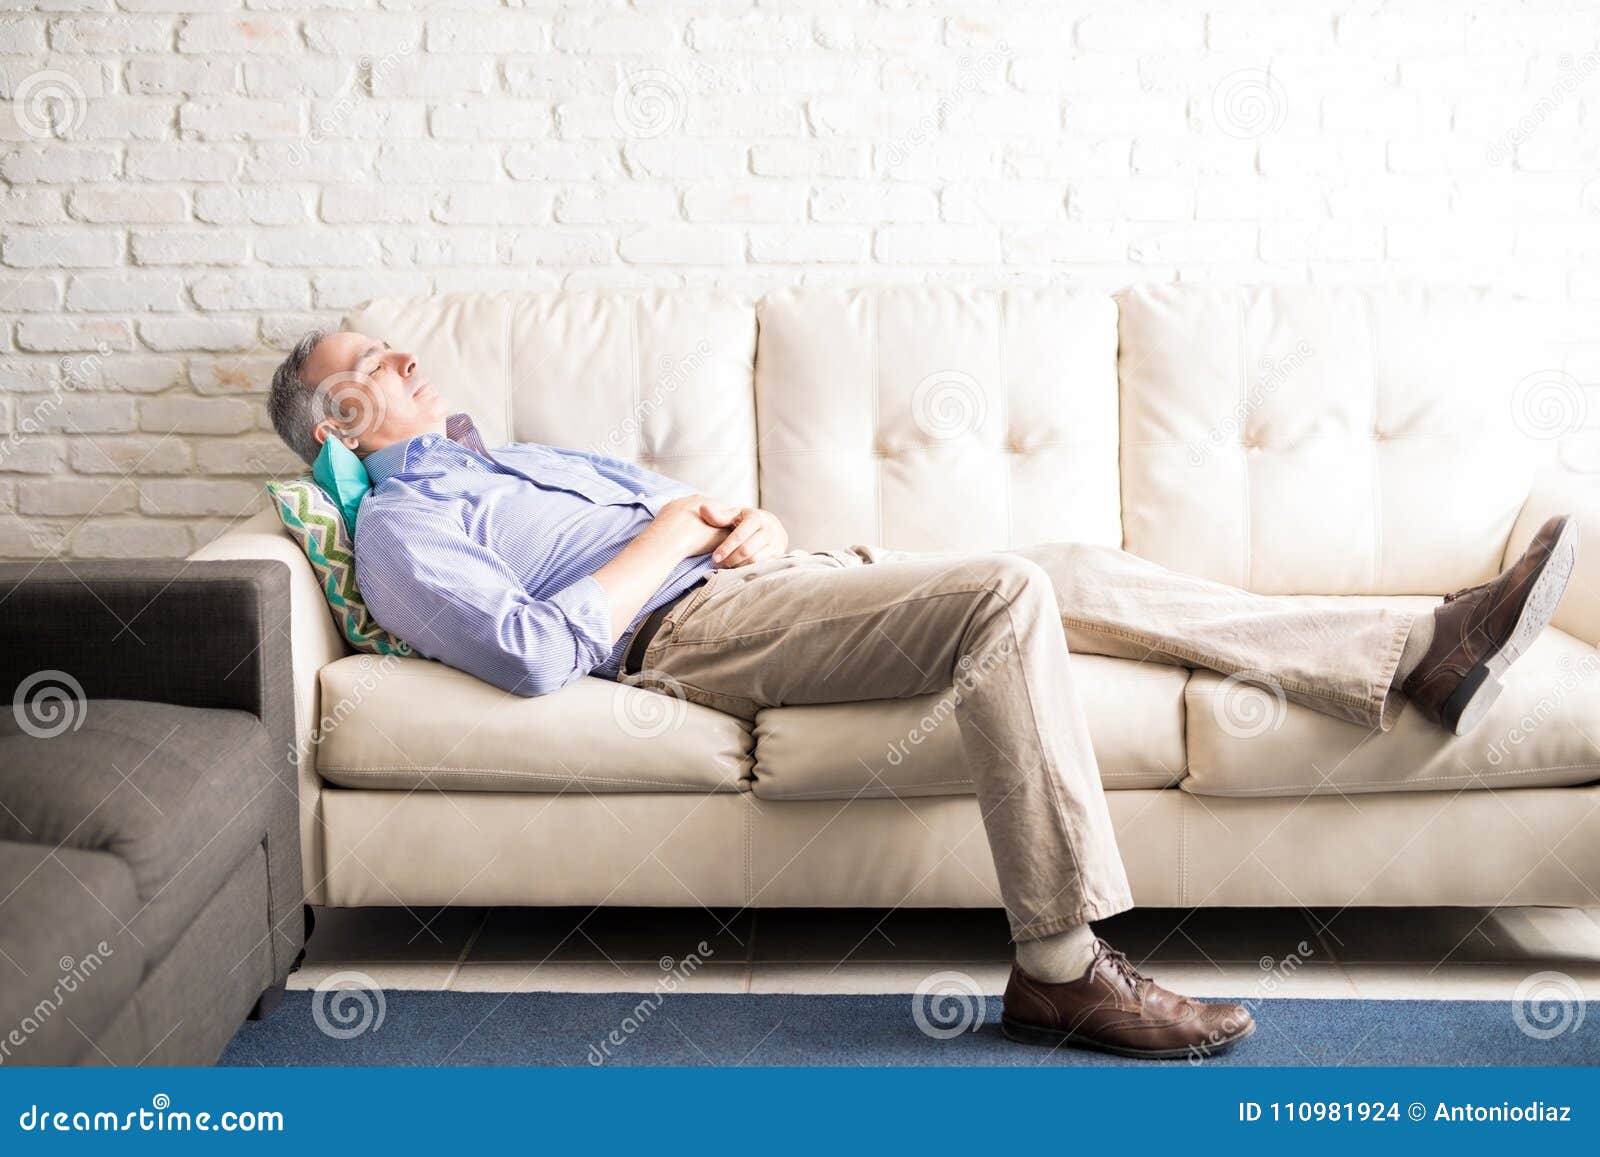 Middle Aged Man Taking A Nap On Couch Stock Photo Image Of Living